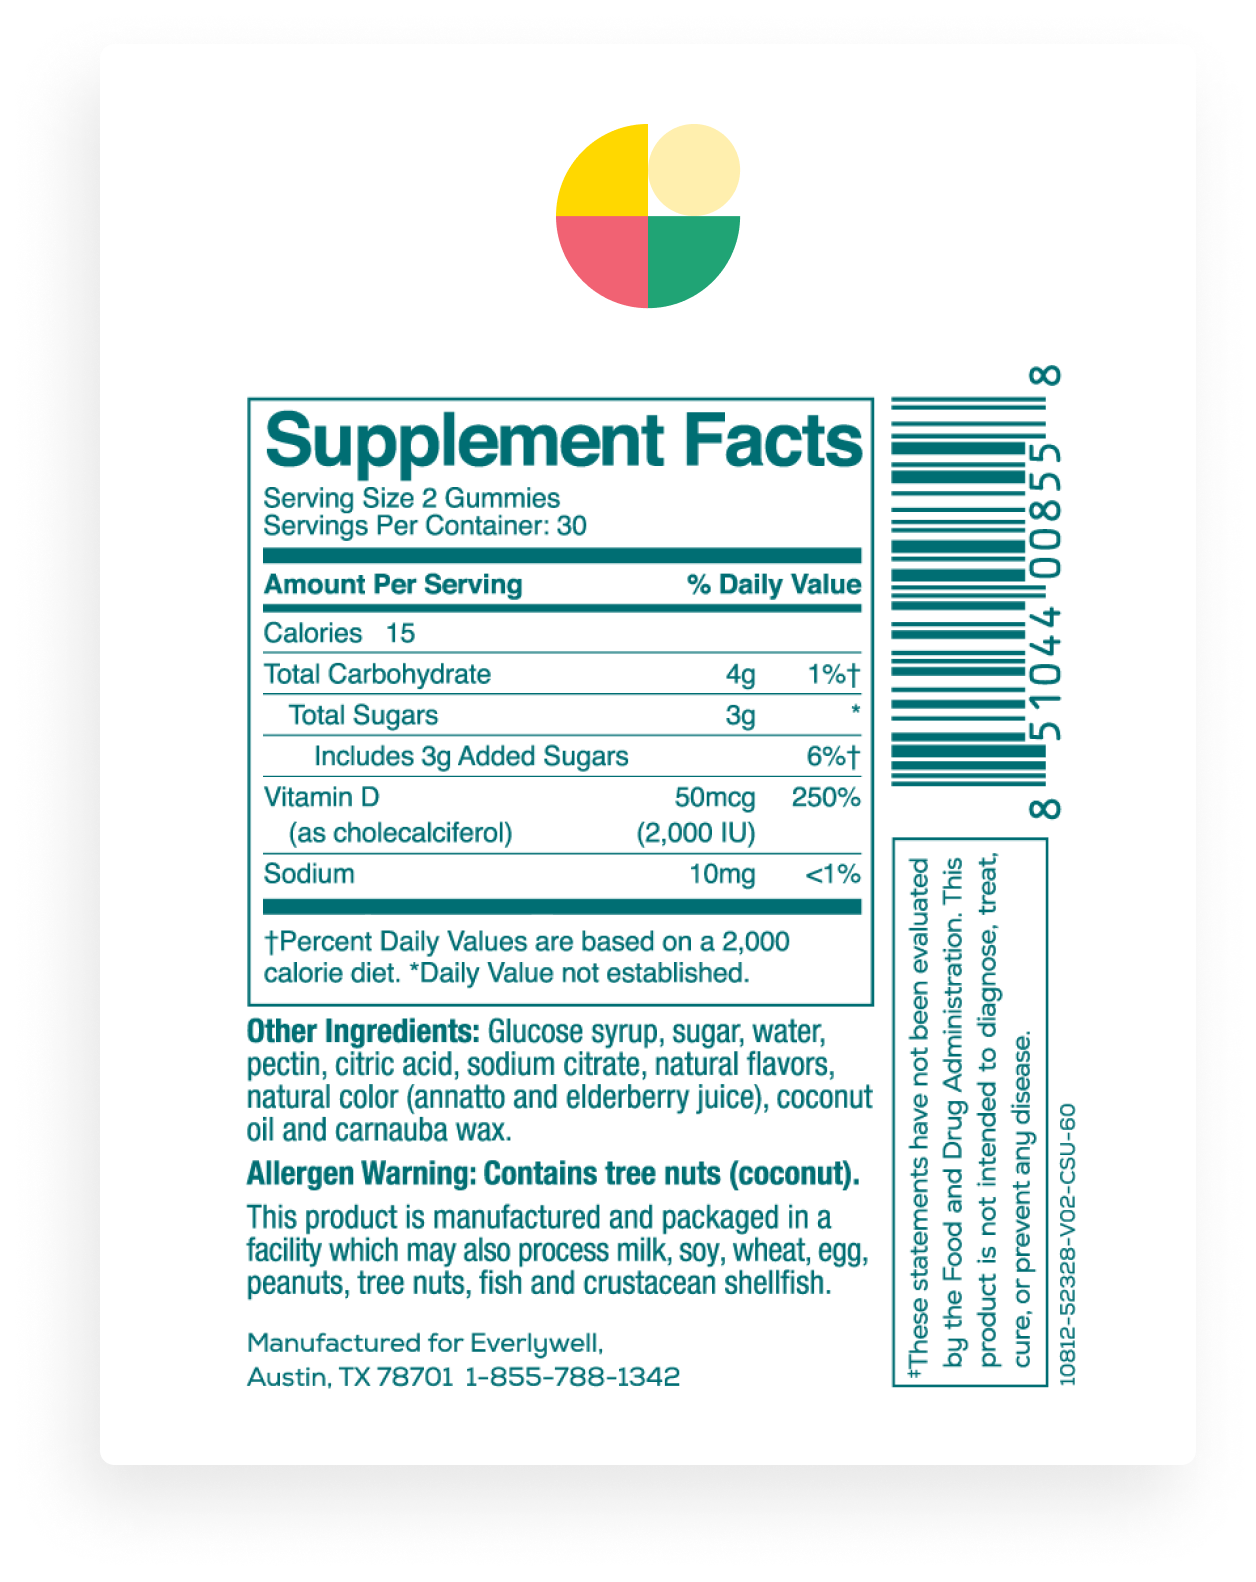 Supplement Facts for Vitamin D3 Gummies